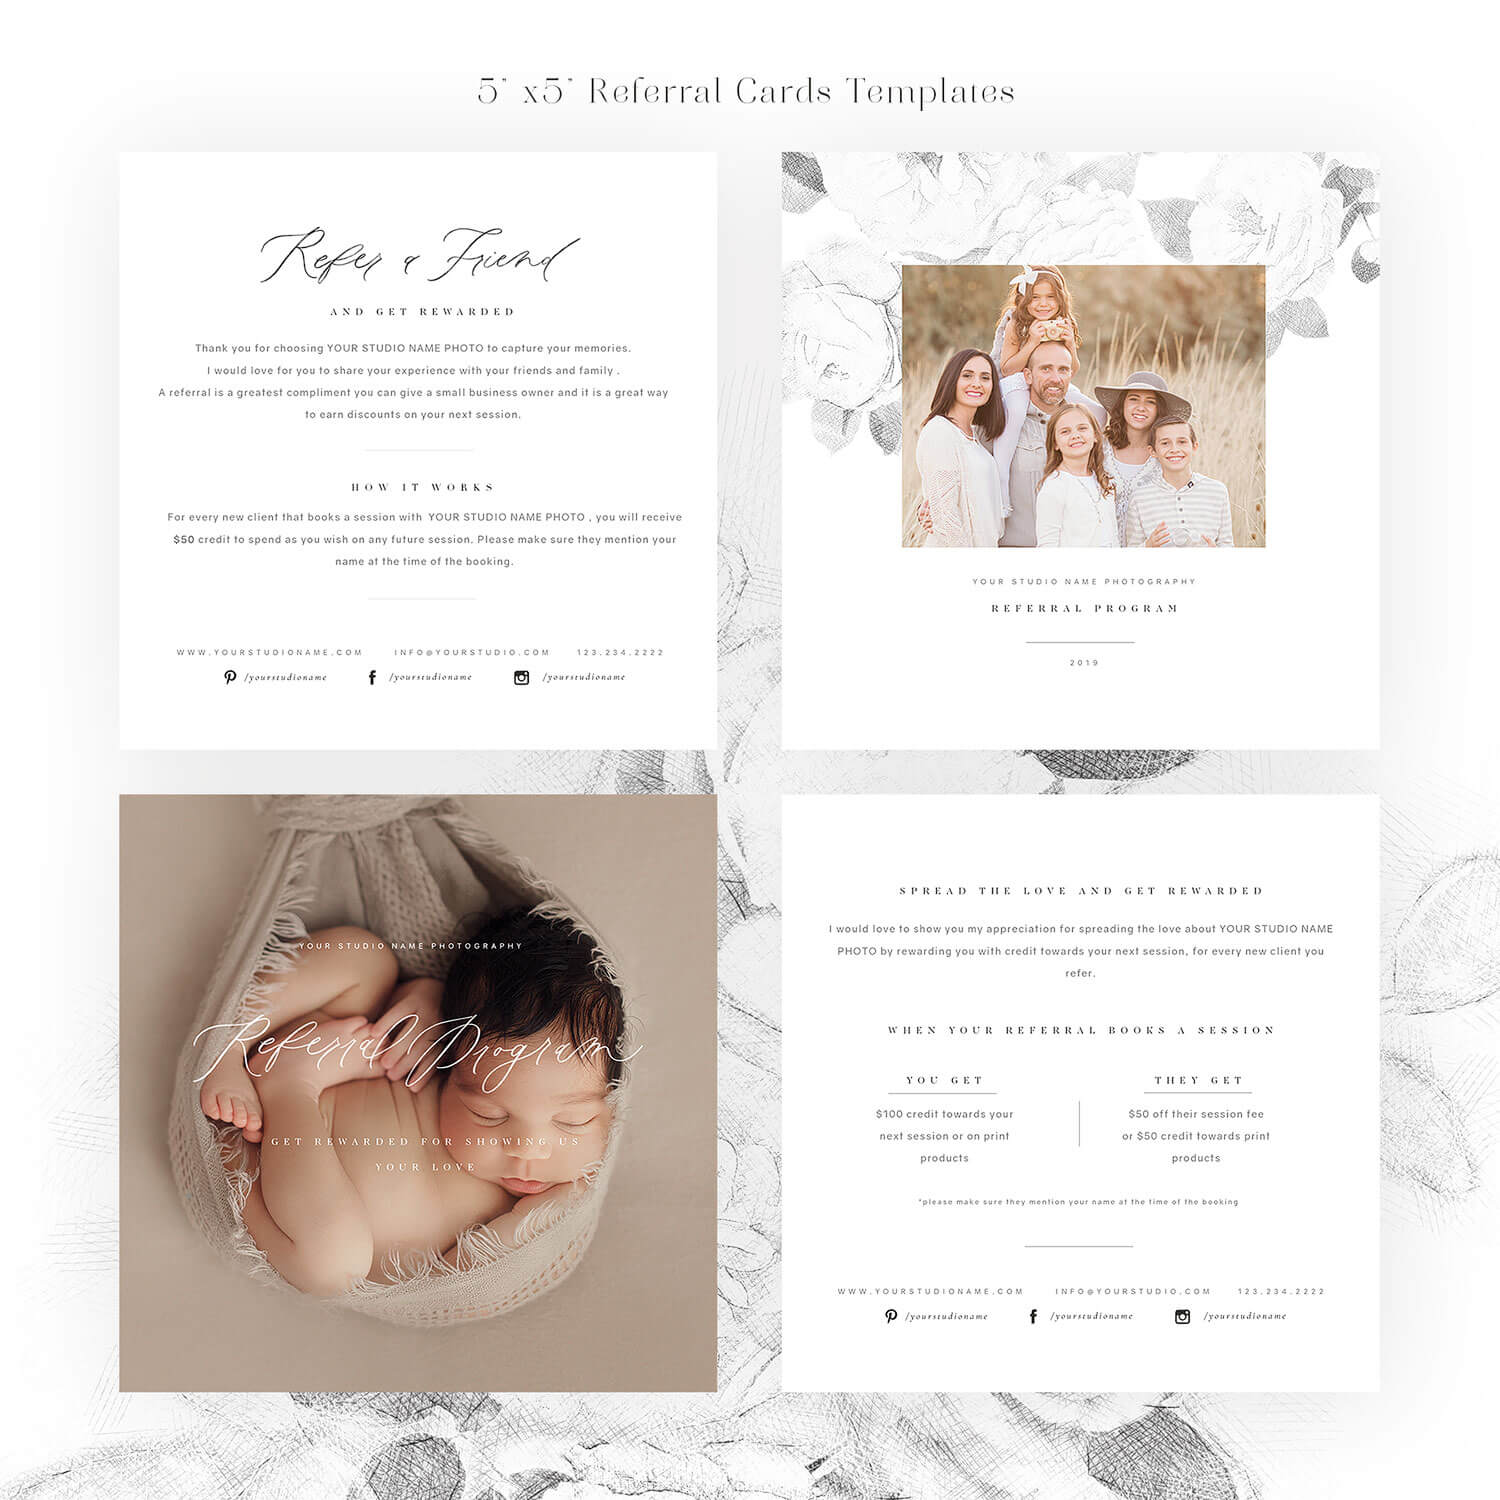 Referral Love 5×5 Card Templates With Regard To Referral Card Template